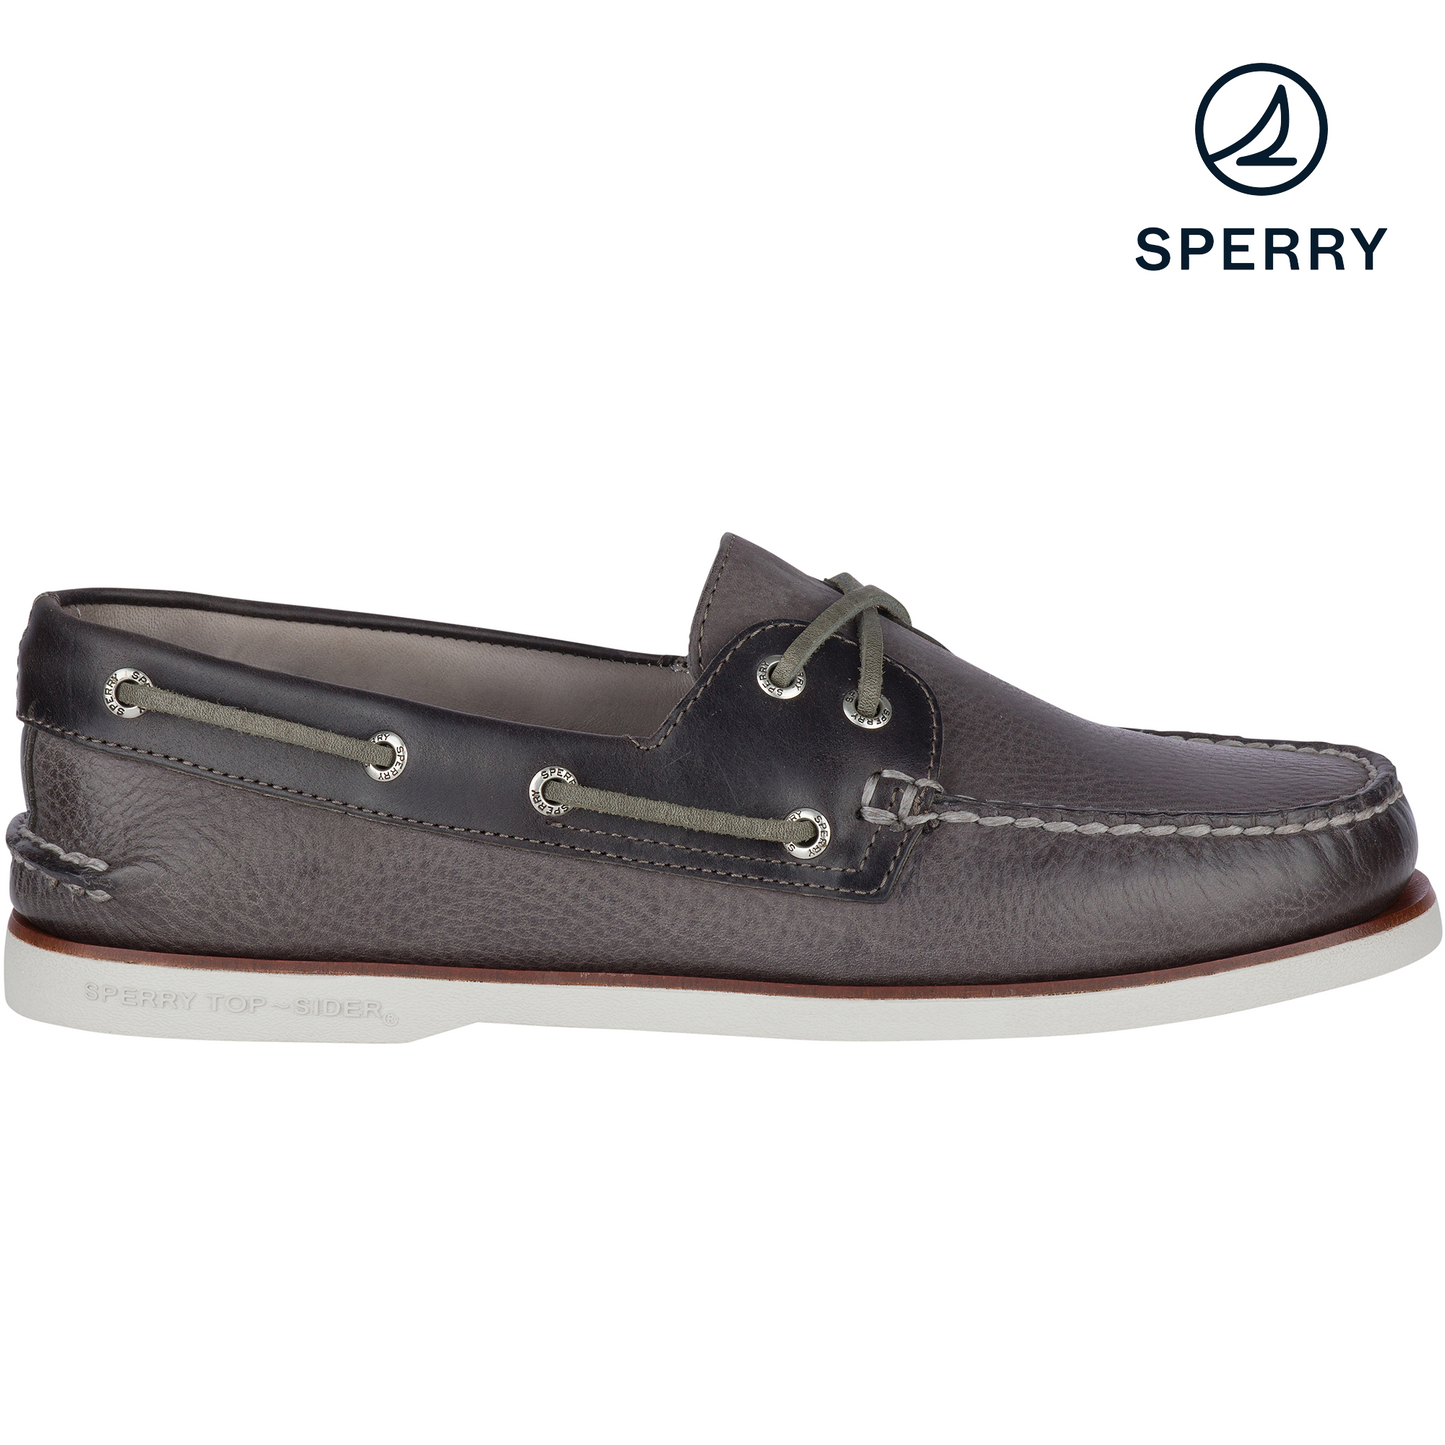 Sperry Men's Gold Cup Authentic Original Rivingston Grey Boat Shoe (STS19321)